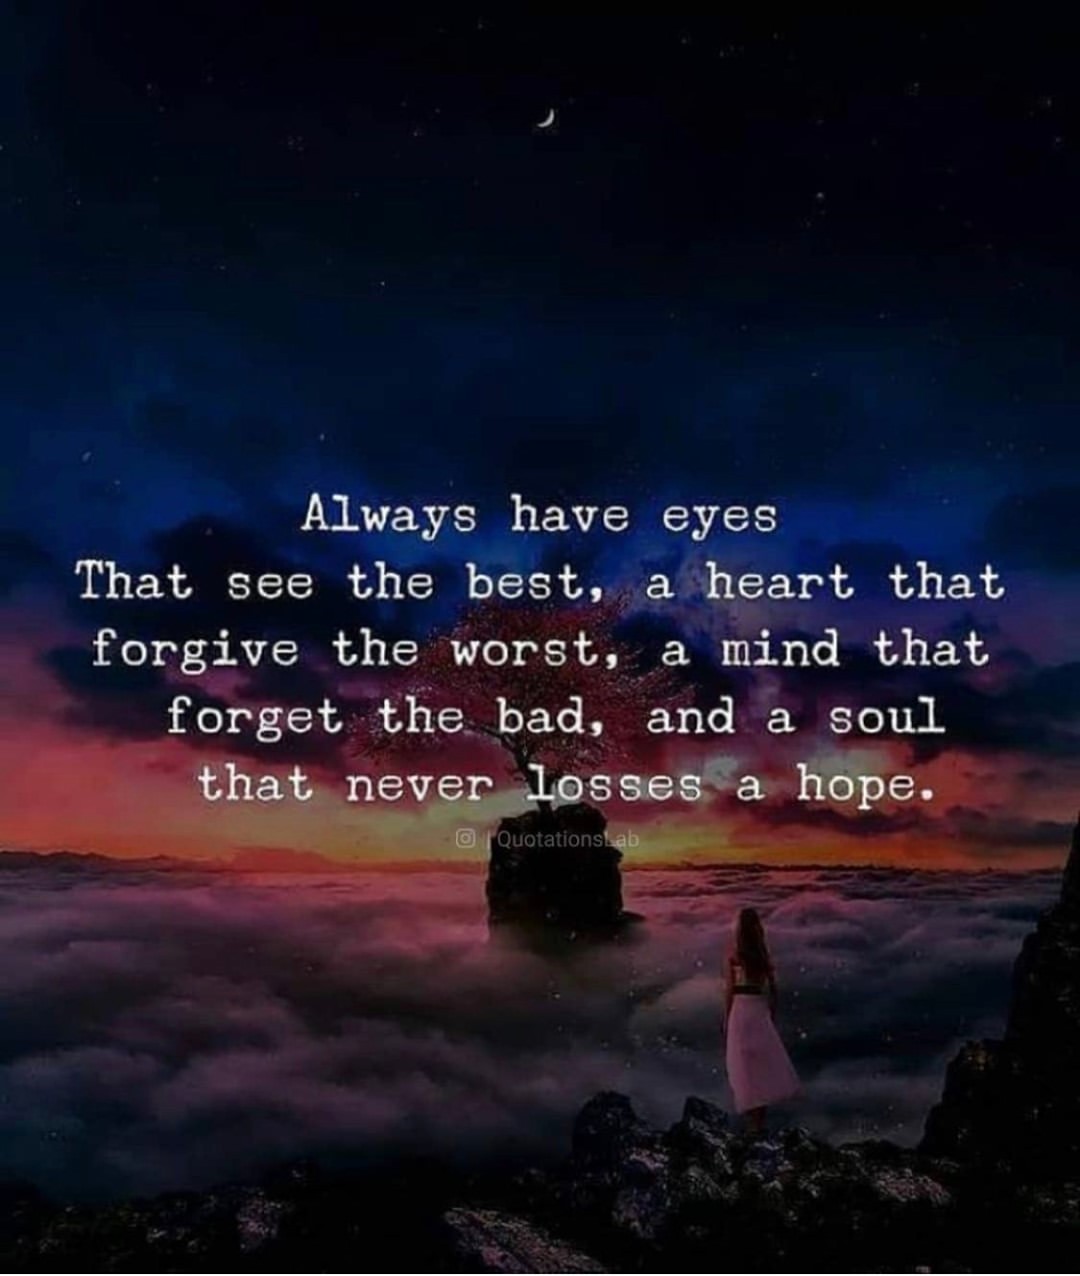 Always have eyes. That see the best, a heart, that forgive the worst, a mind that forget the bad, and a soul that never losses a hope.